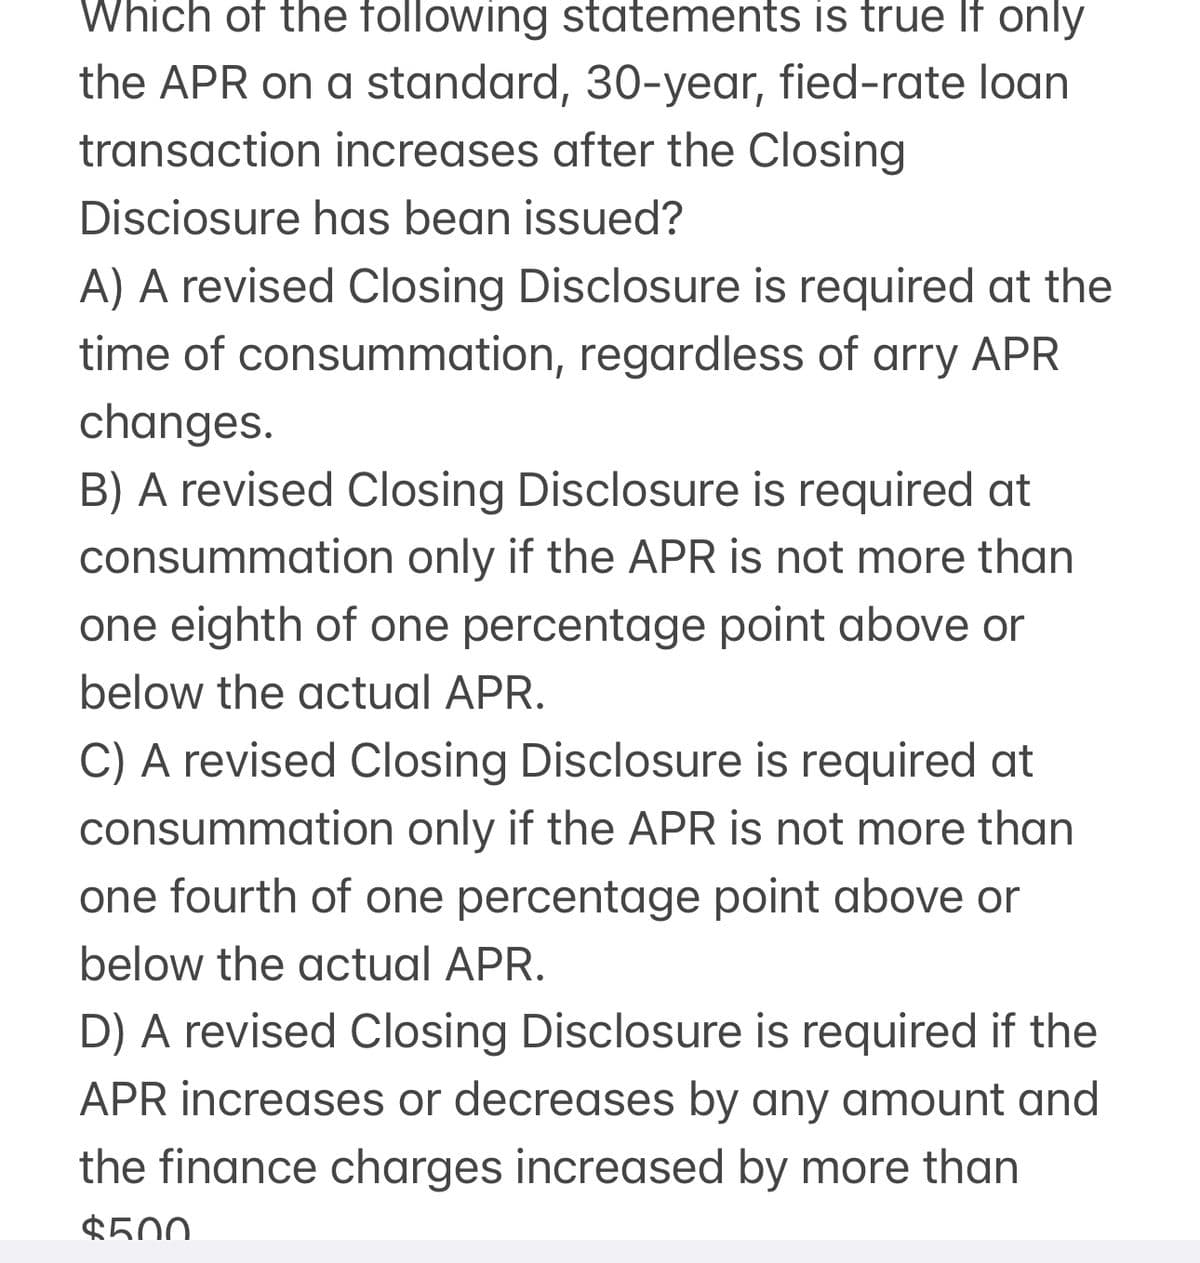 Which of the following statements is true If only
the APR on a standard, 30-year, fied-rate loan
transaction increases after the Closing
Disciosure has bean issued?
A) A revised Closing Disclosure is required at the
time of consummation, regardless of arry APR
changes.
B) A revised Closing Disclosure is required at
consummation only if the APR is not more than
one eighth of one percentage point above or
below the actual APR.
C) A revised Closing Disclosure is required at
consummation only if the APR is not more than
one fourth of one percentage point above or
below the actual APR.
D) A revised Closing Disclosure is required if the
APR increases or decreases by any amount and
the finance charges increased by more than
$500